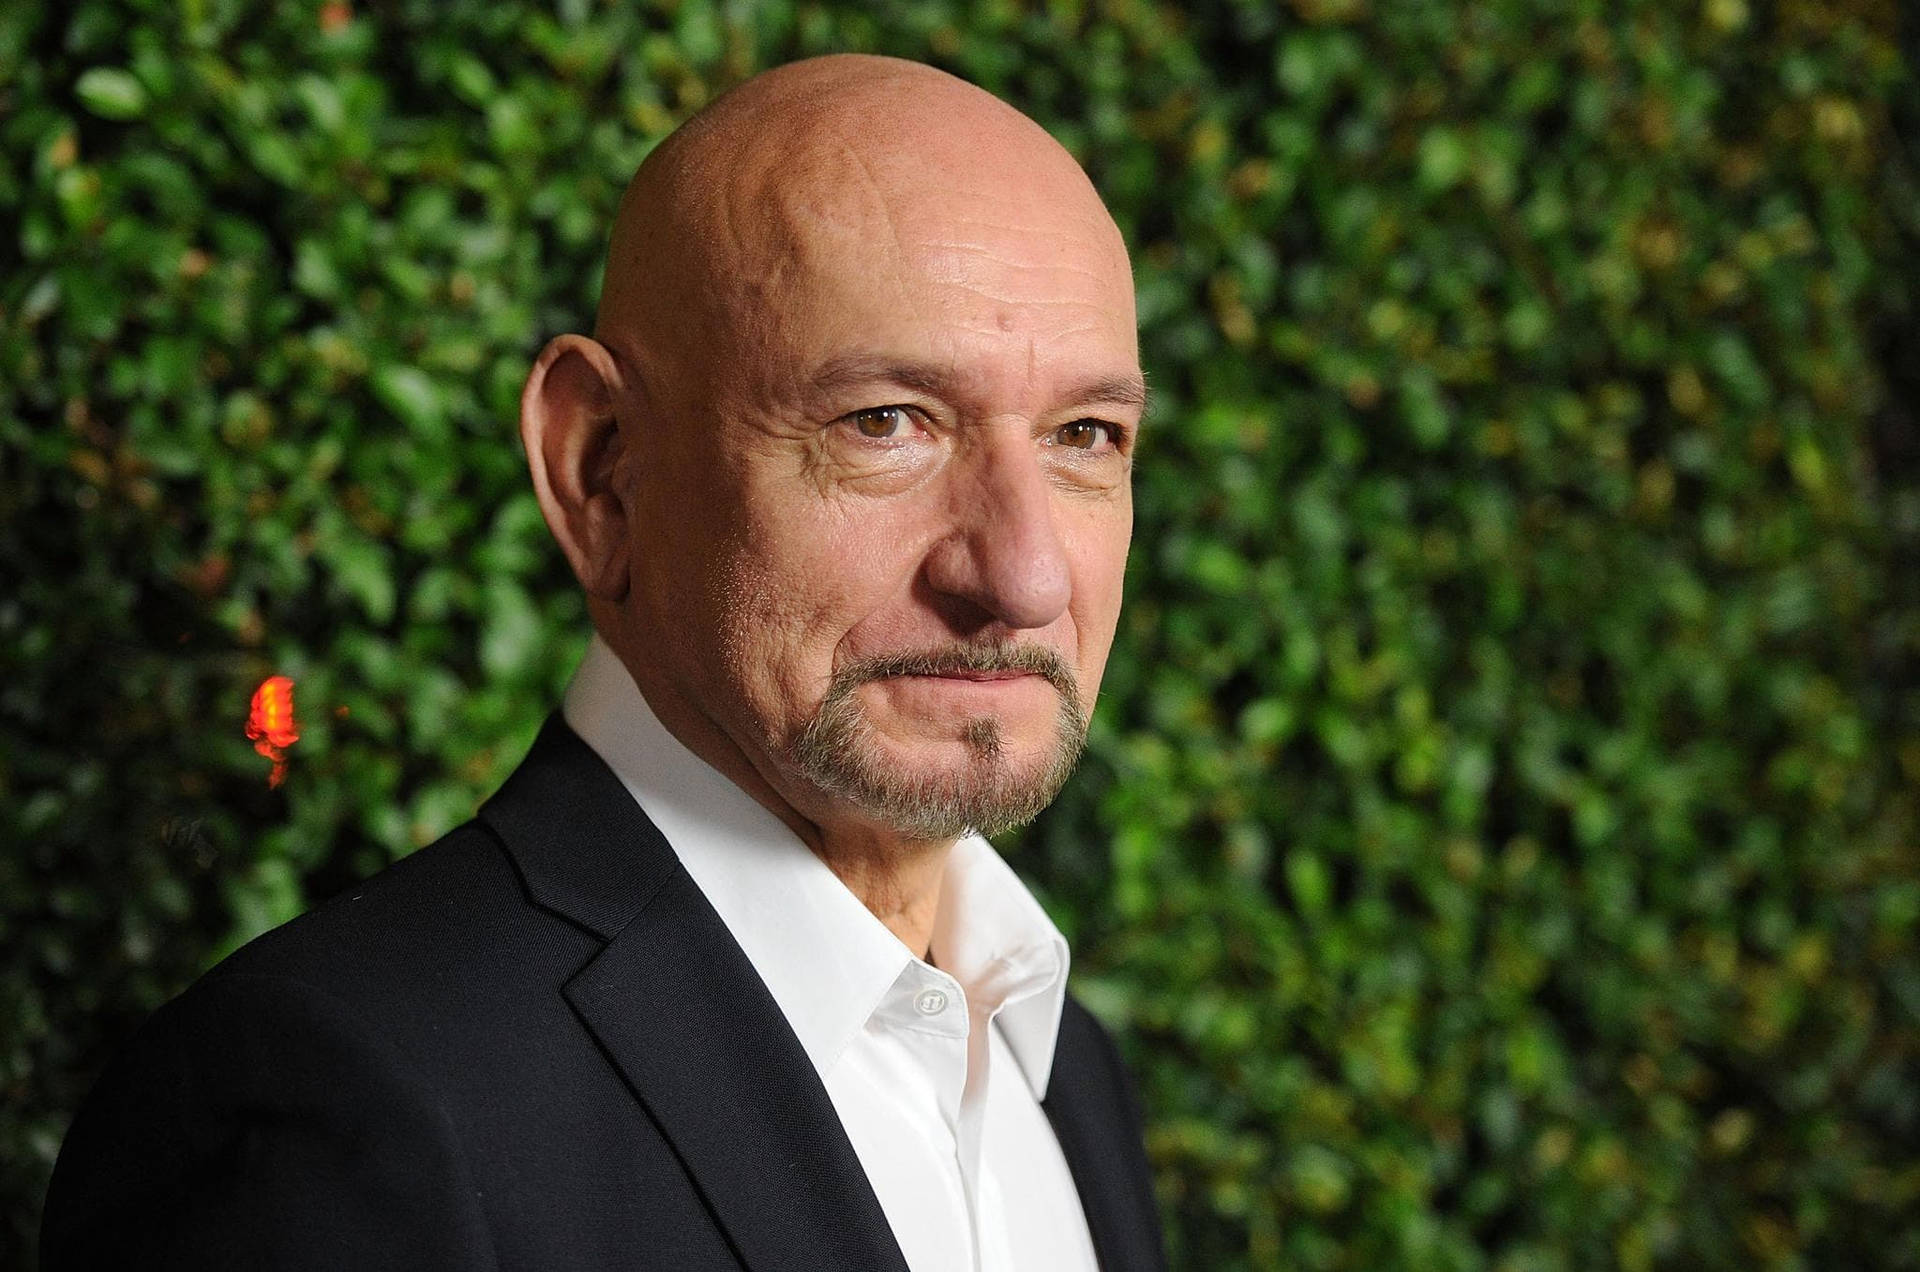 Sir Ben Kingsley at the 2011 Young Adult Premiere Wallpaper